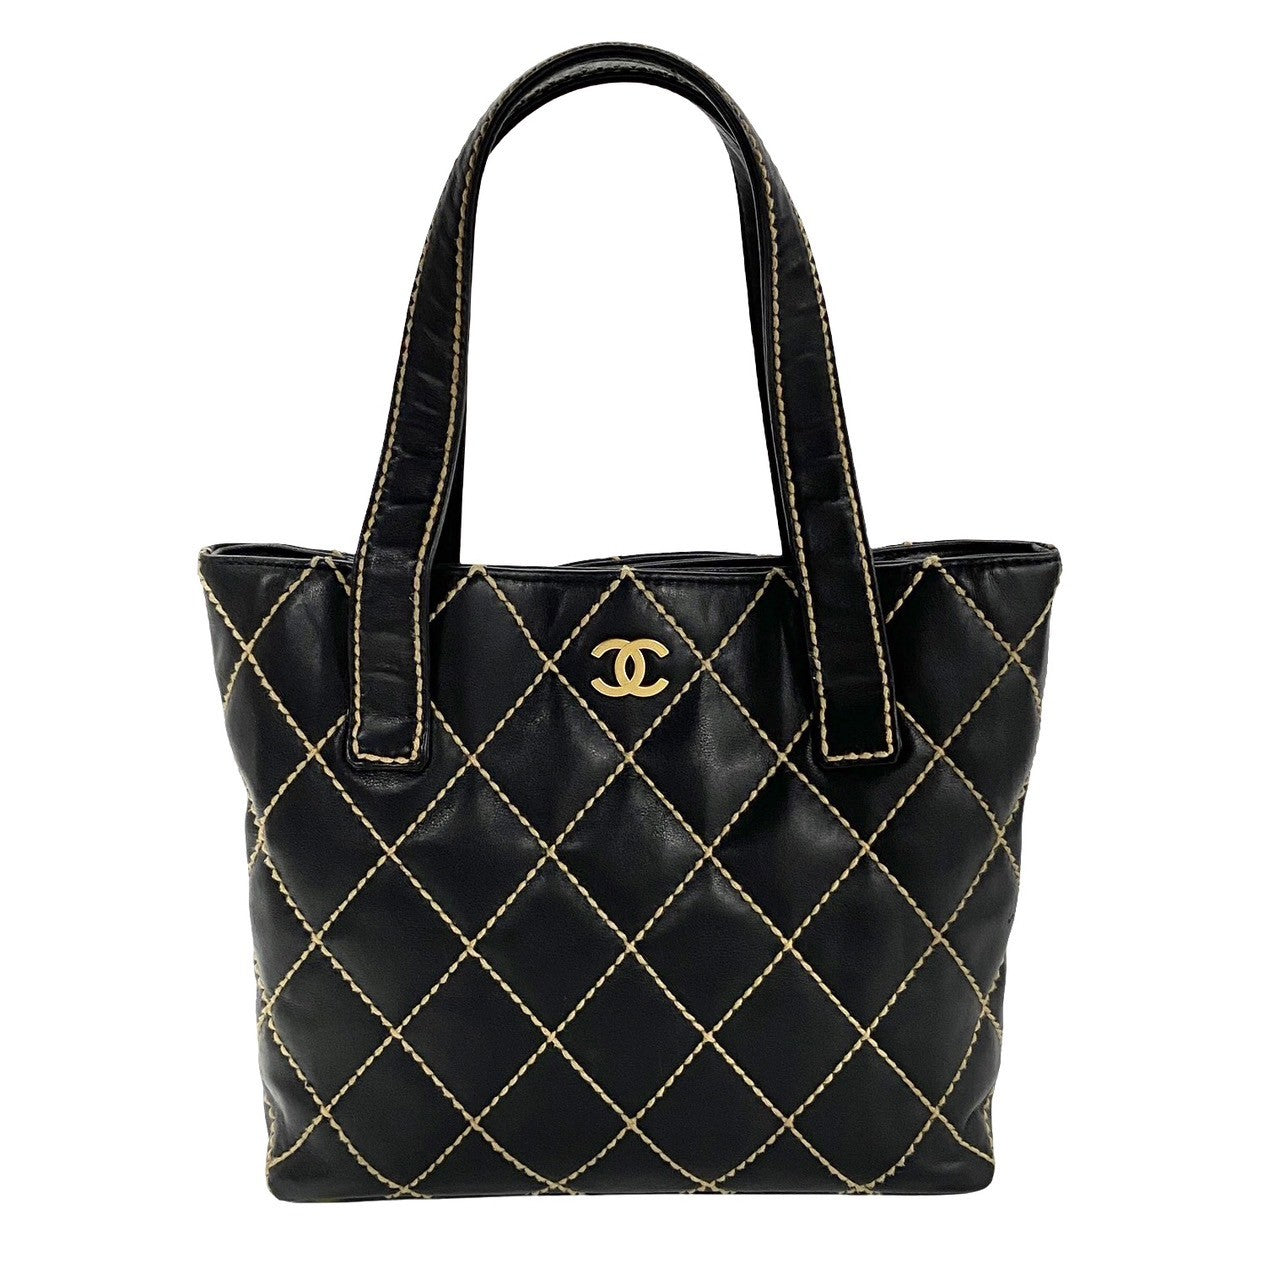 Chanel Matelasse Wild Stitch Coco Mark Leather Tote Bag Leather Tote Bag 36651 in Good condition